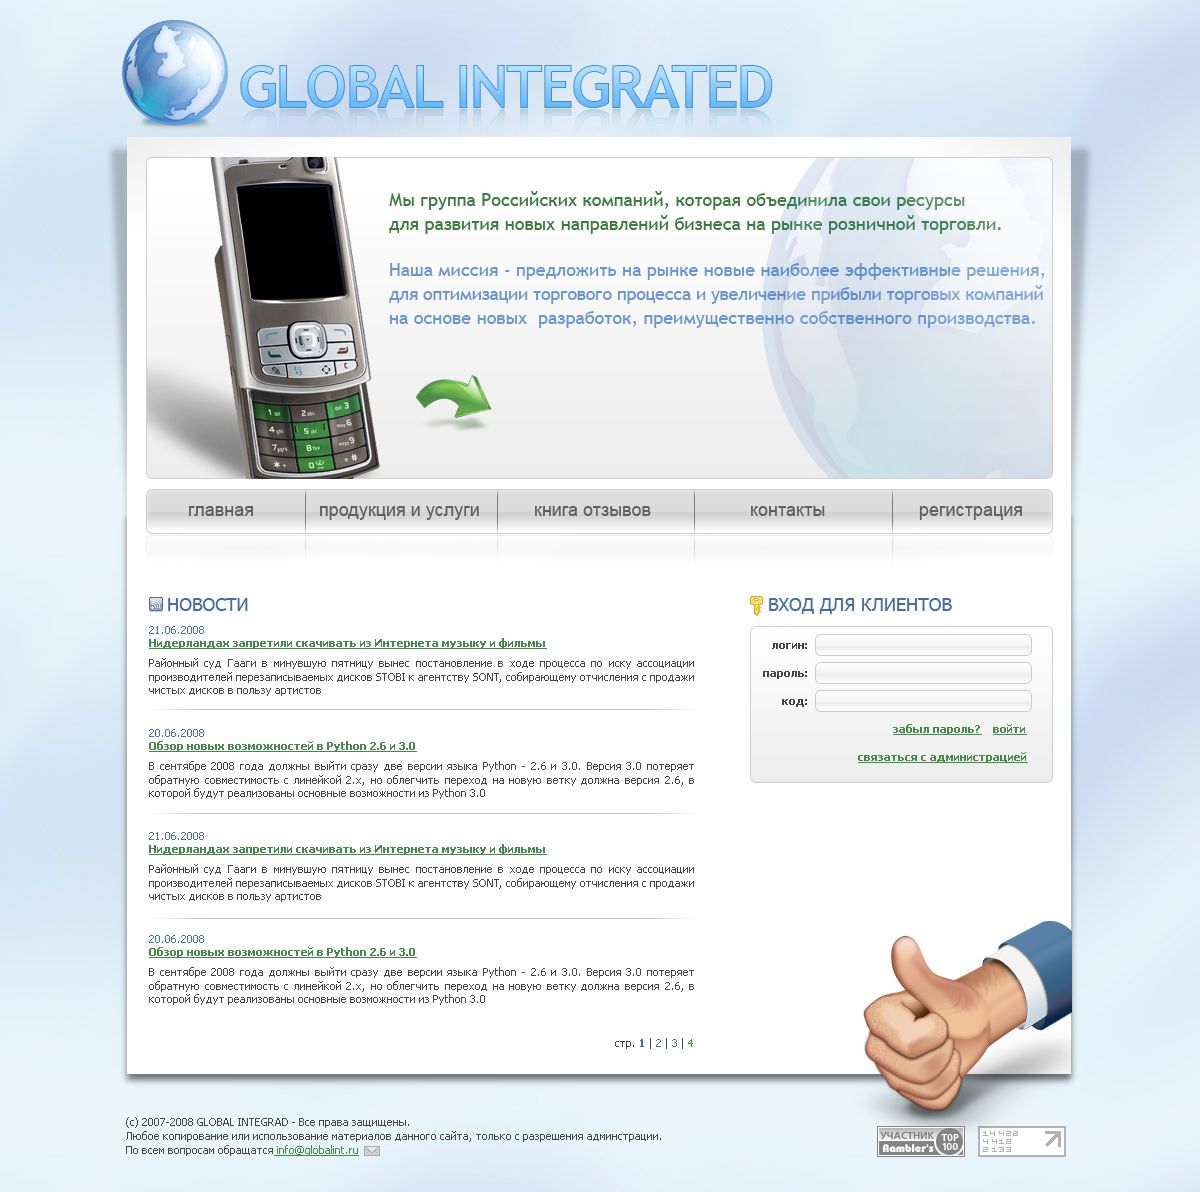 Global integrated